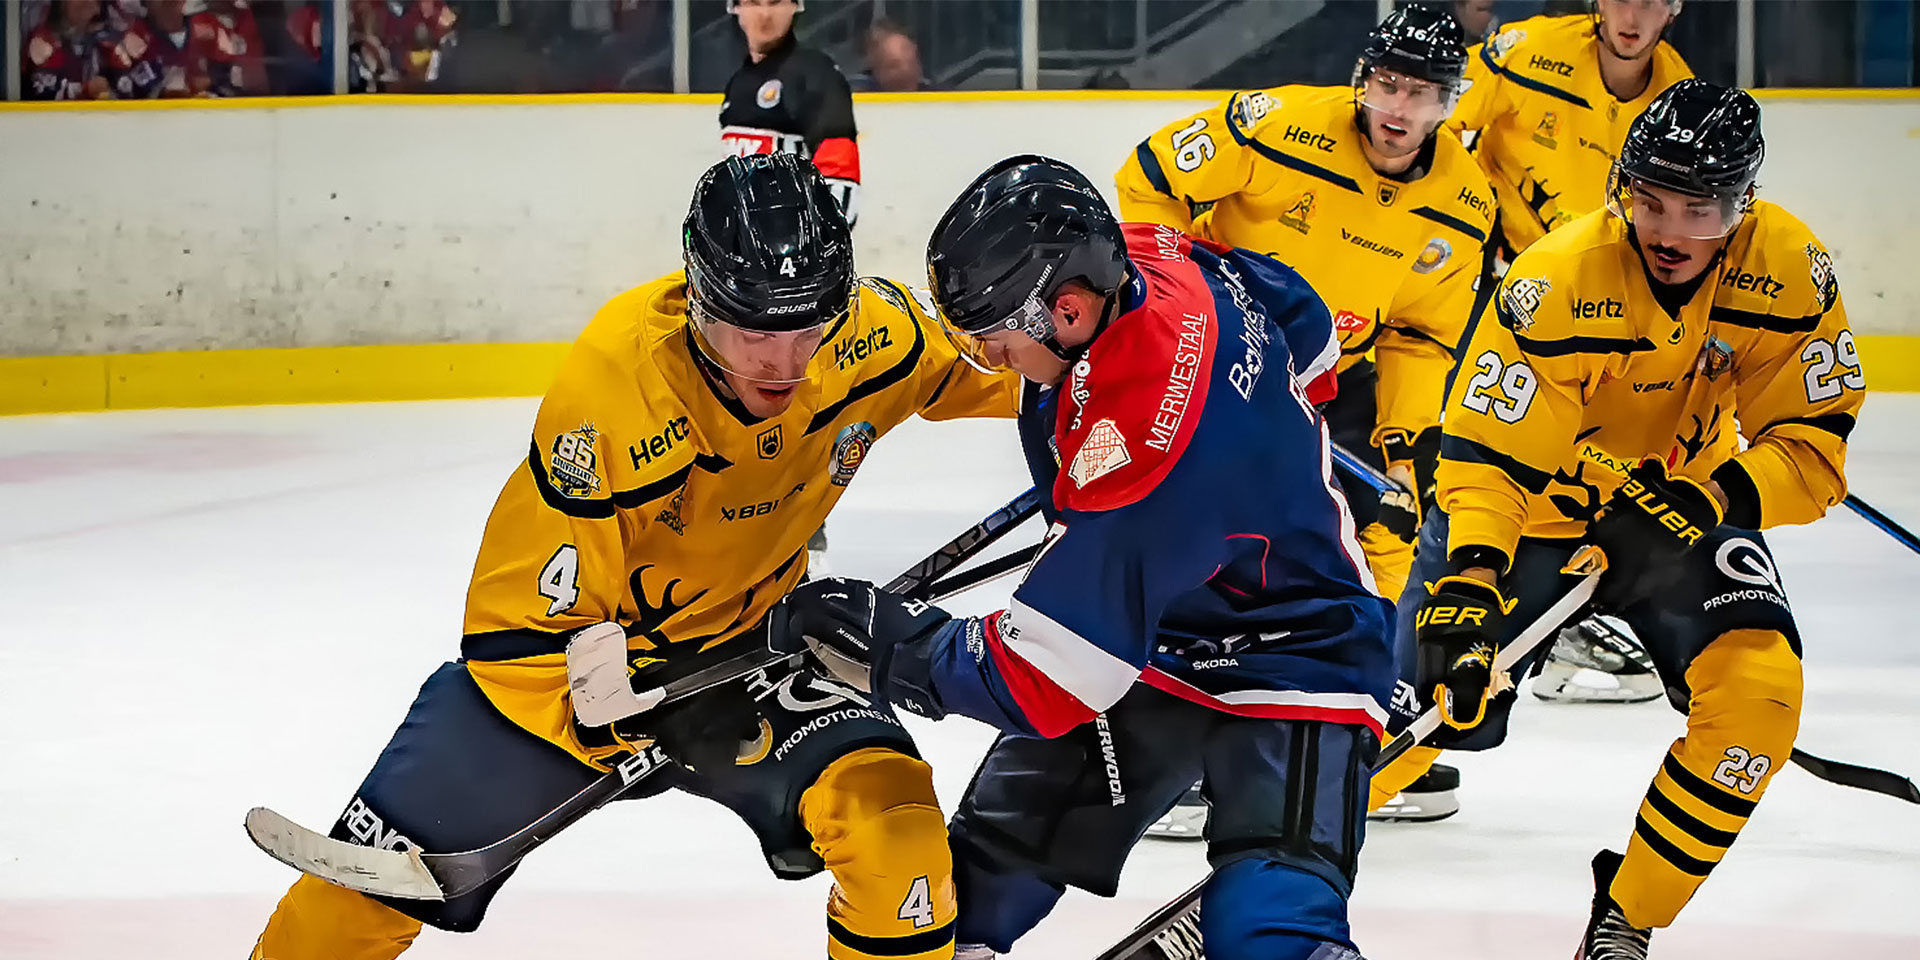 TILBURG TRAPPERS GROEIT